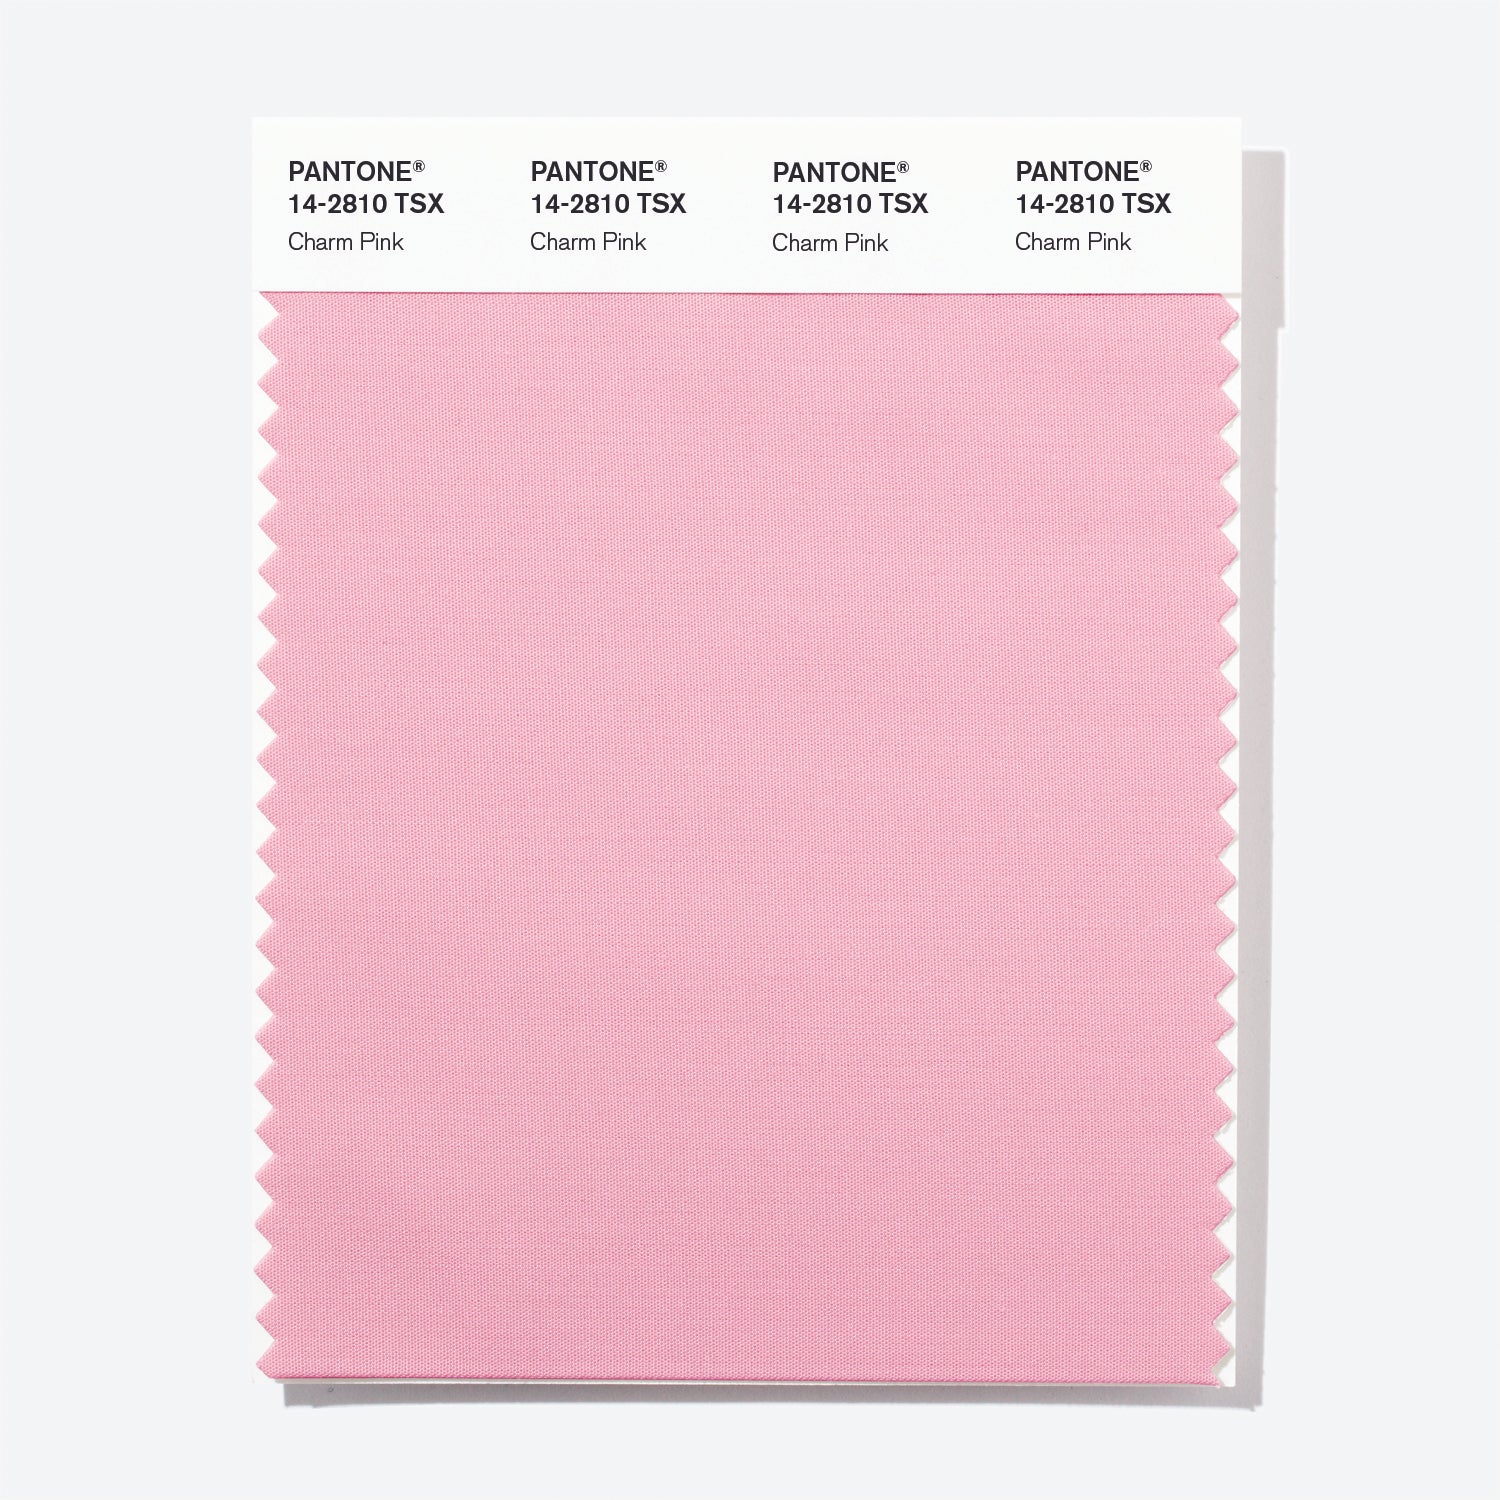 Pantone Polyester Swatch Card 14-2810 TSX (Charm Pink)